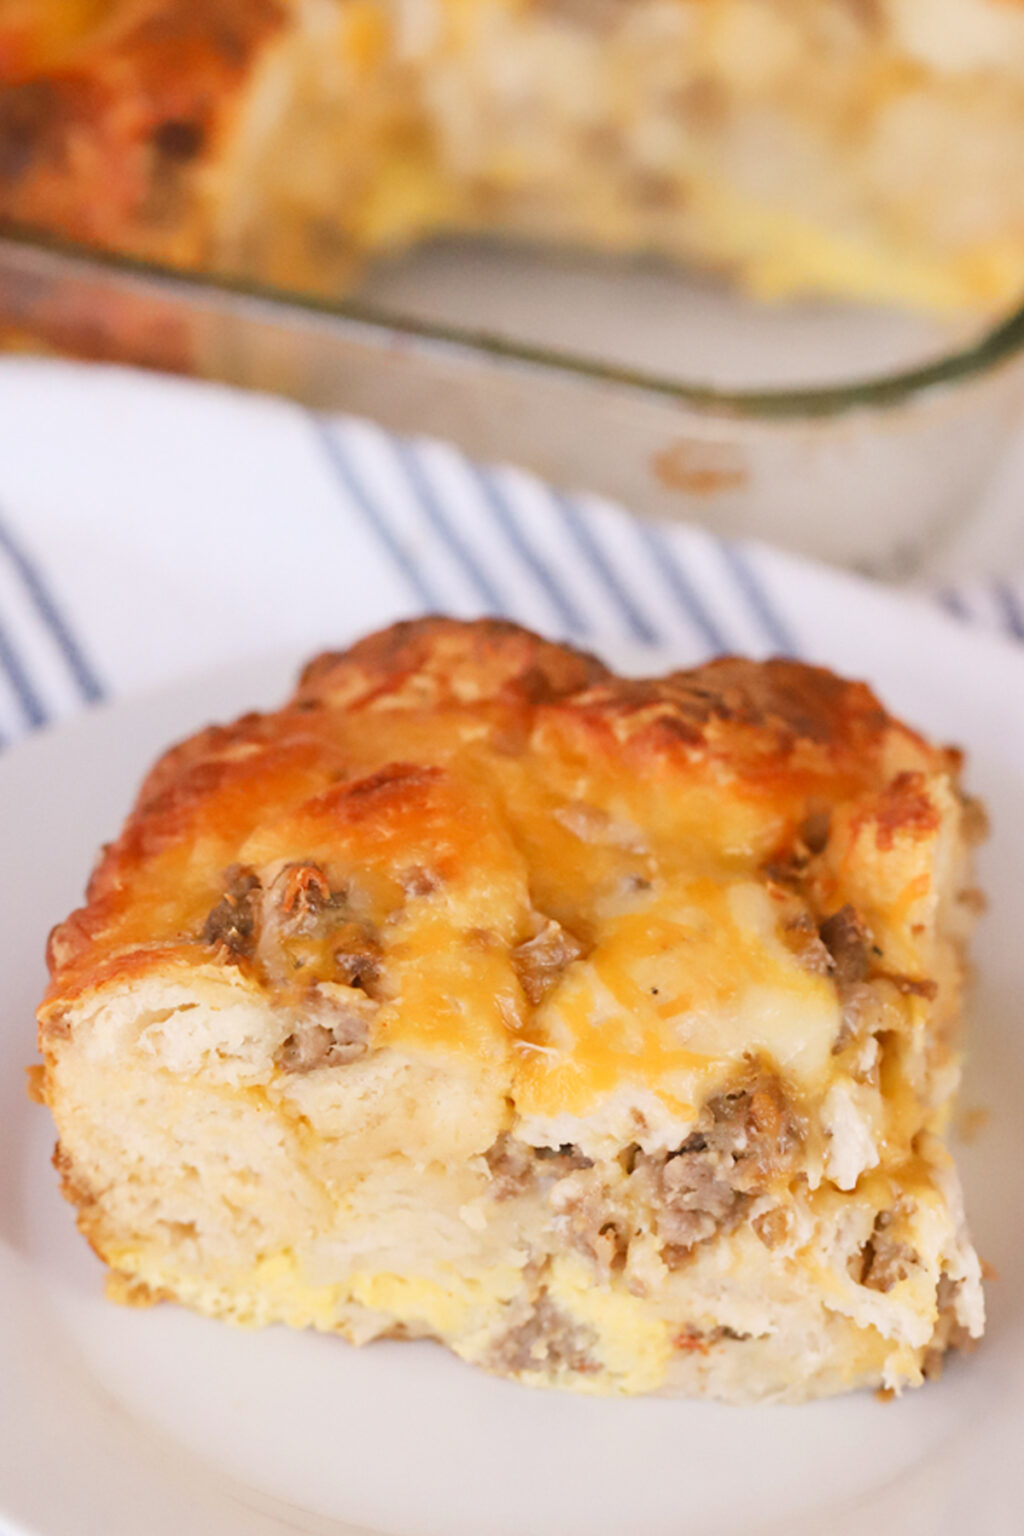 Sausage Egg Biscuit Casserole - The Carefree Kitchen